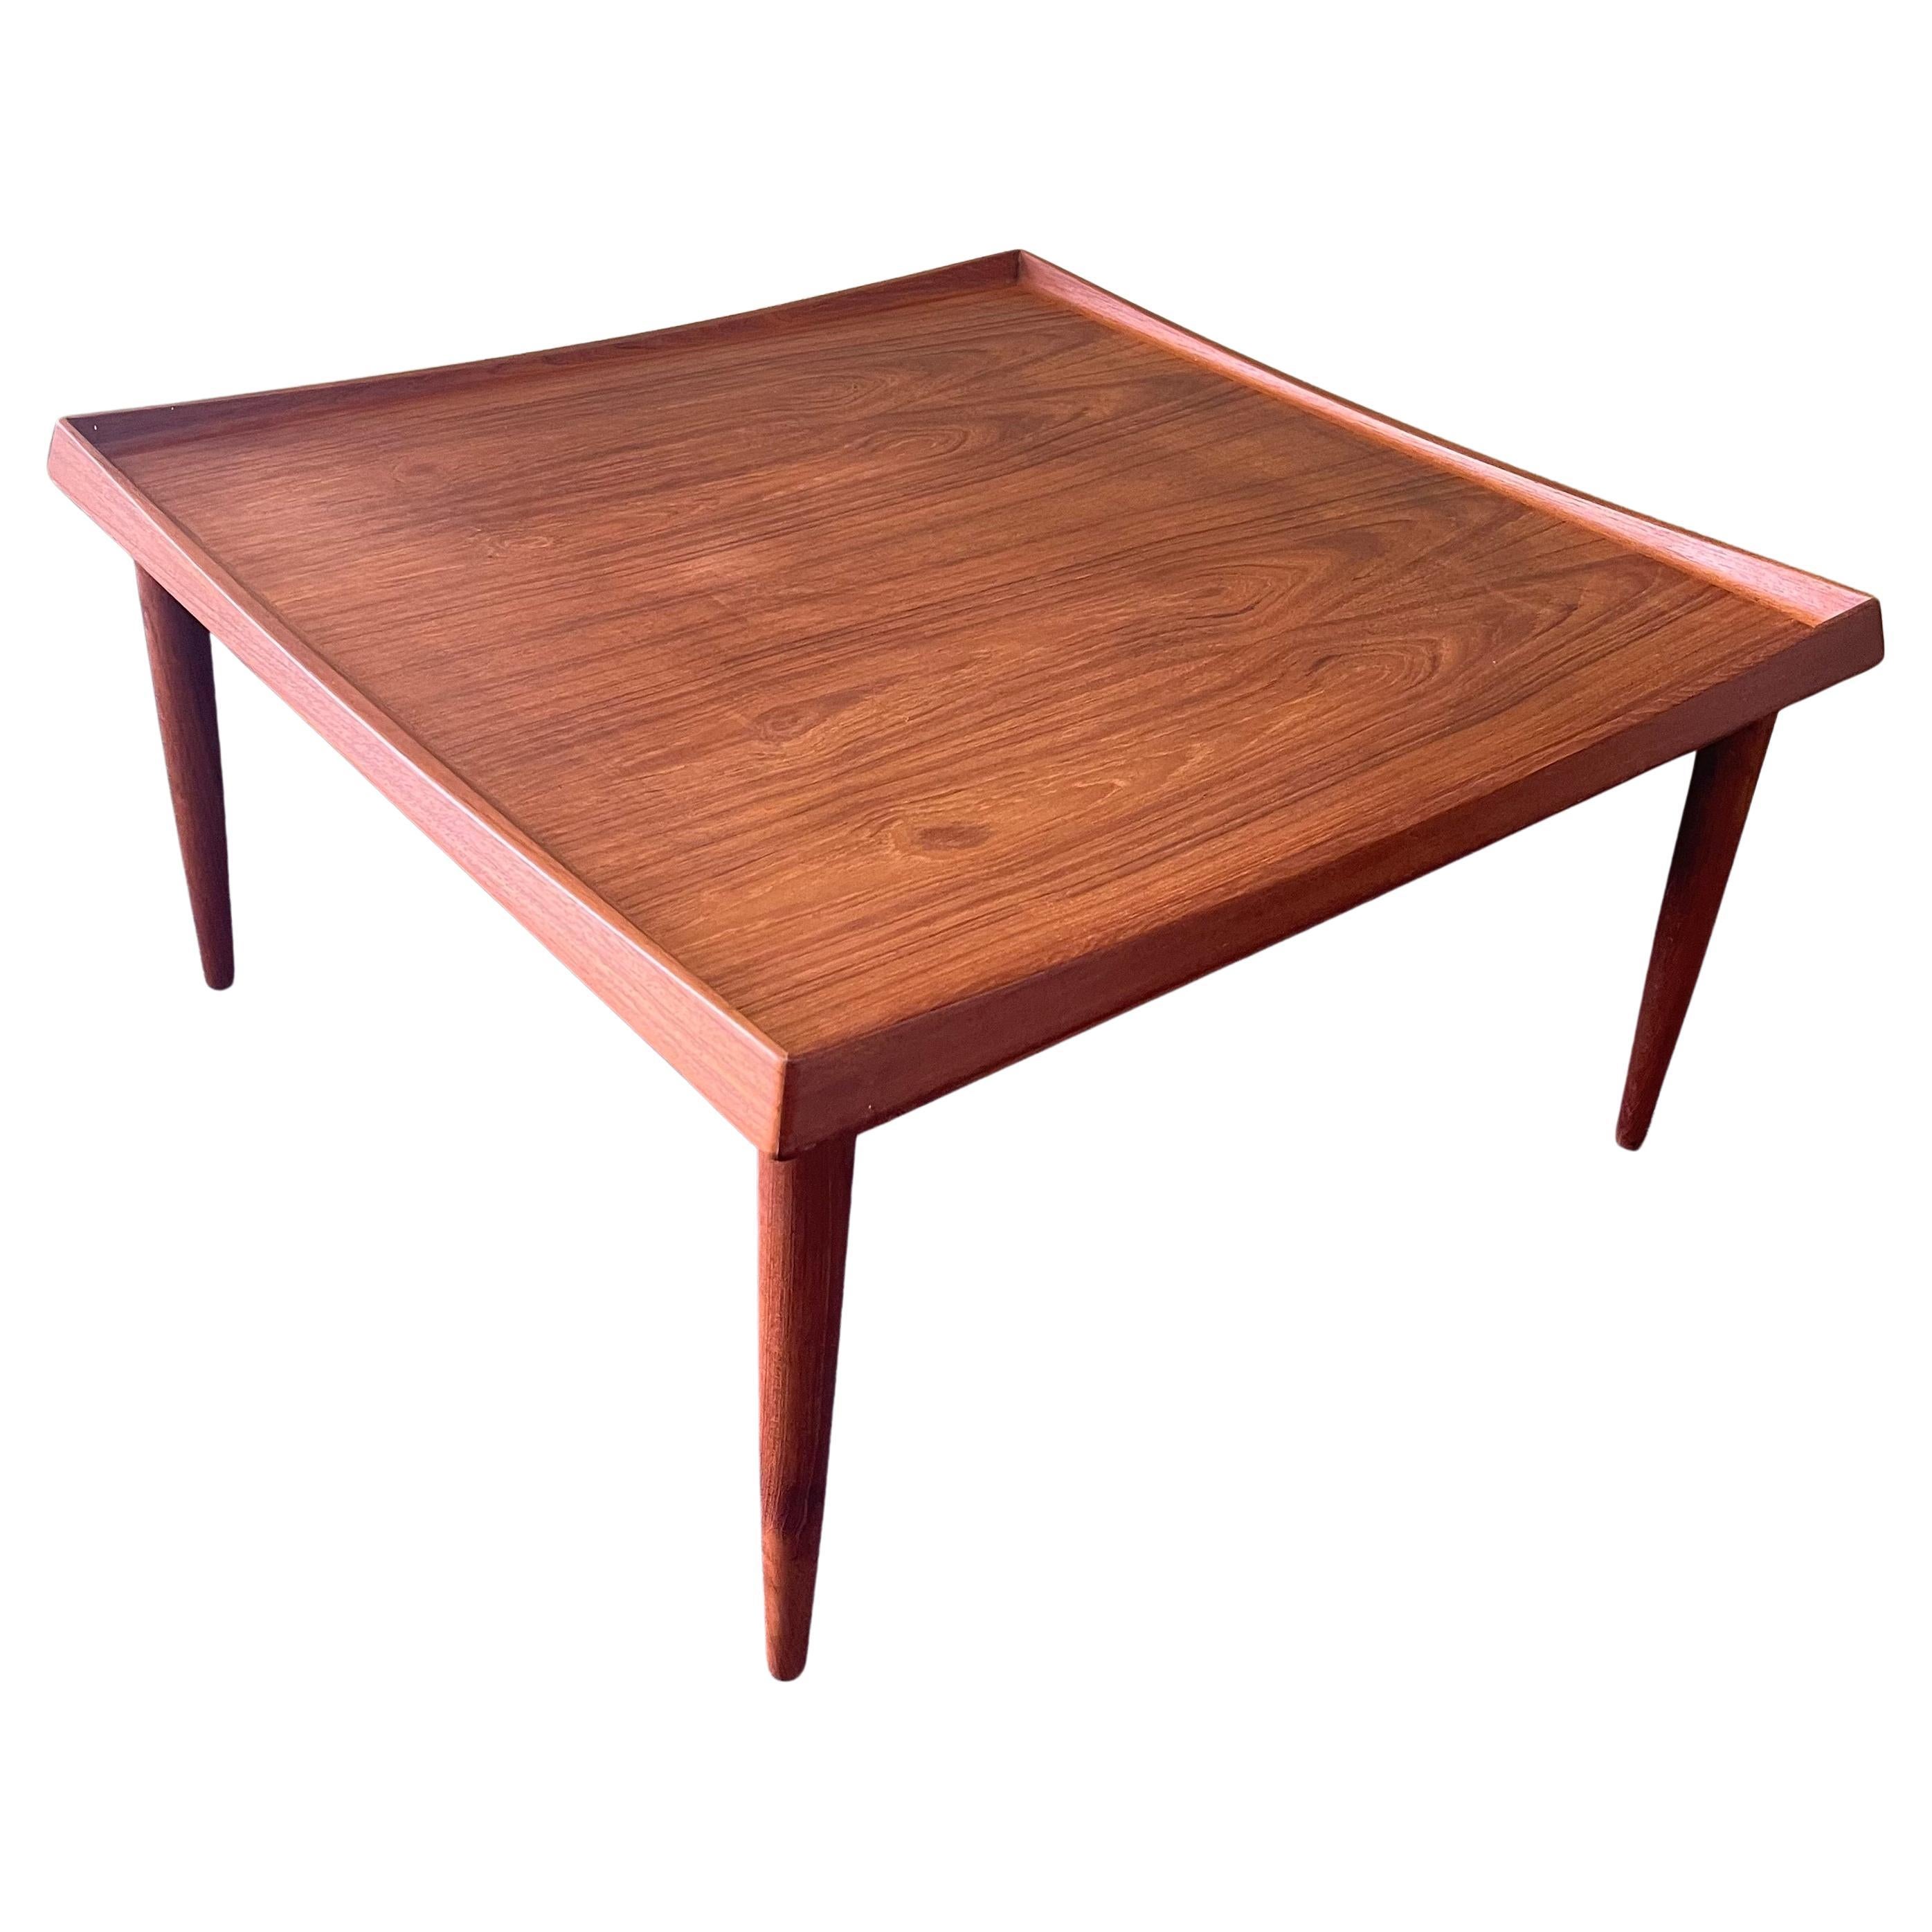 Danish Modern Solid Teak Coffee Table by Moredo For Sale 6